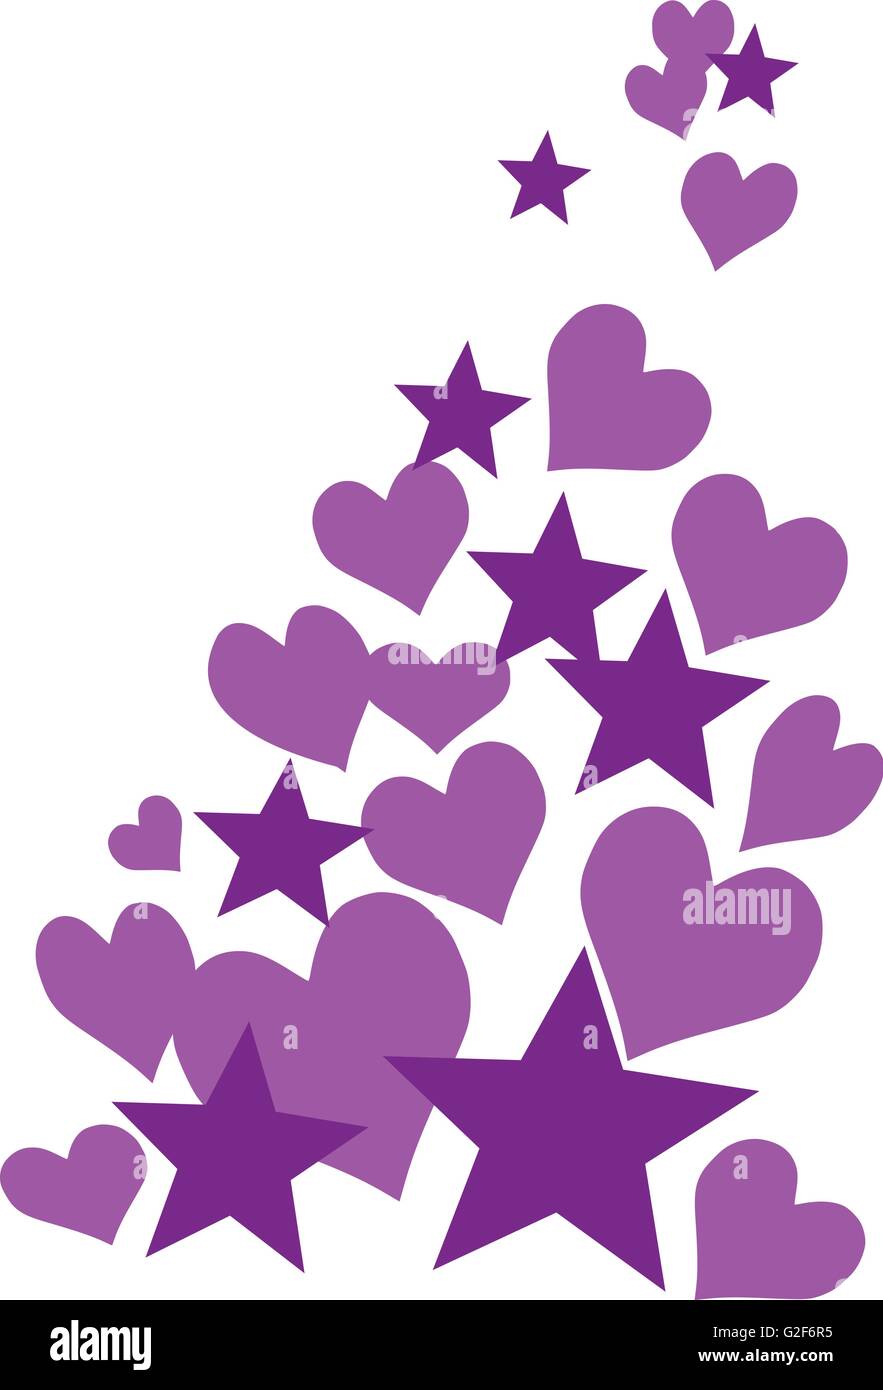 Set of purple hearts and stars Stock Vector